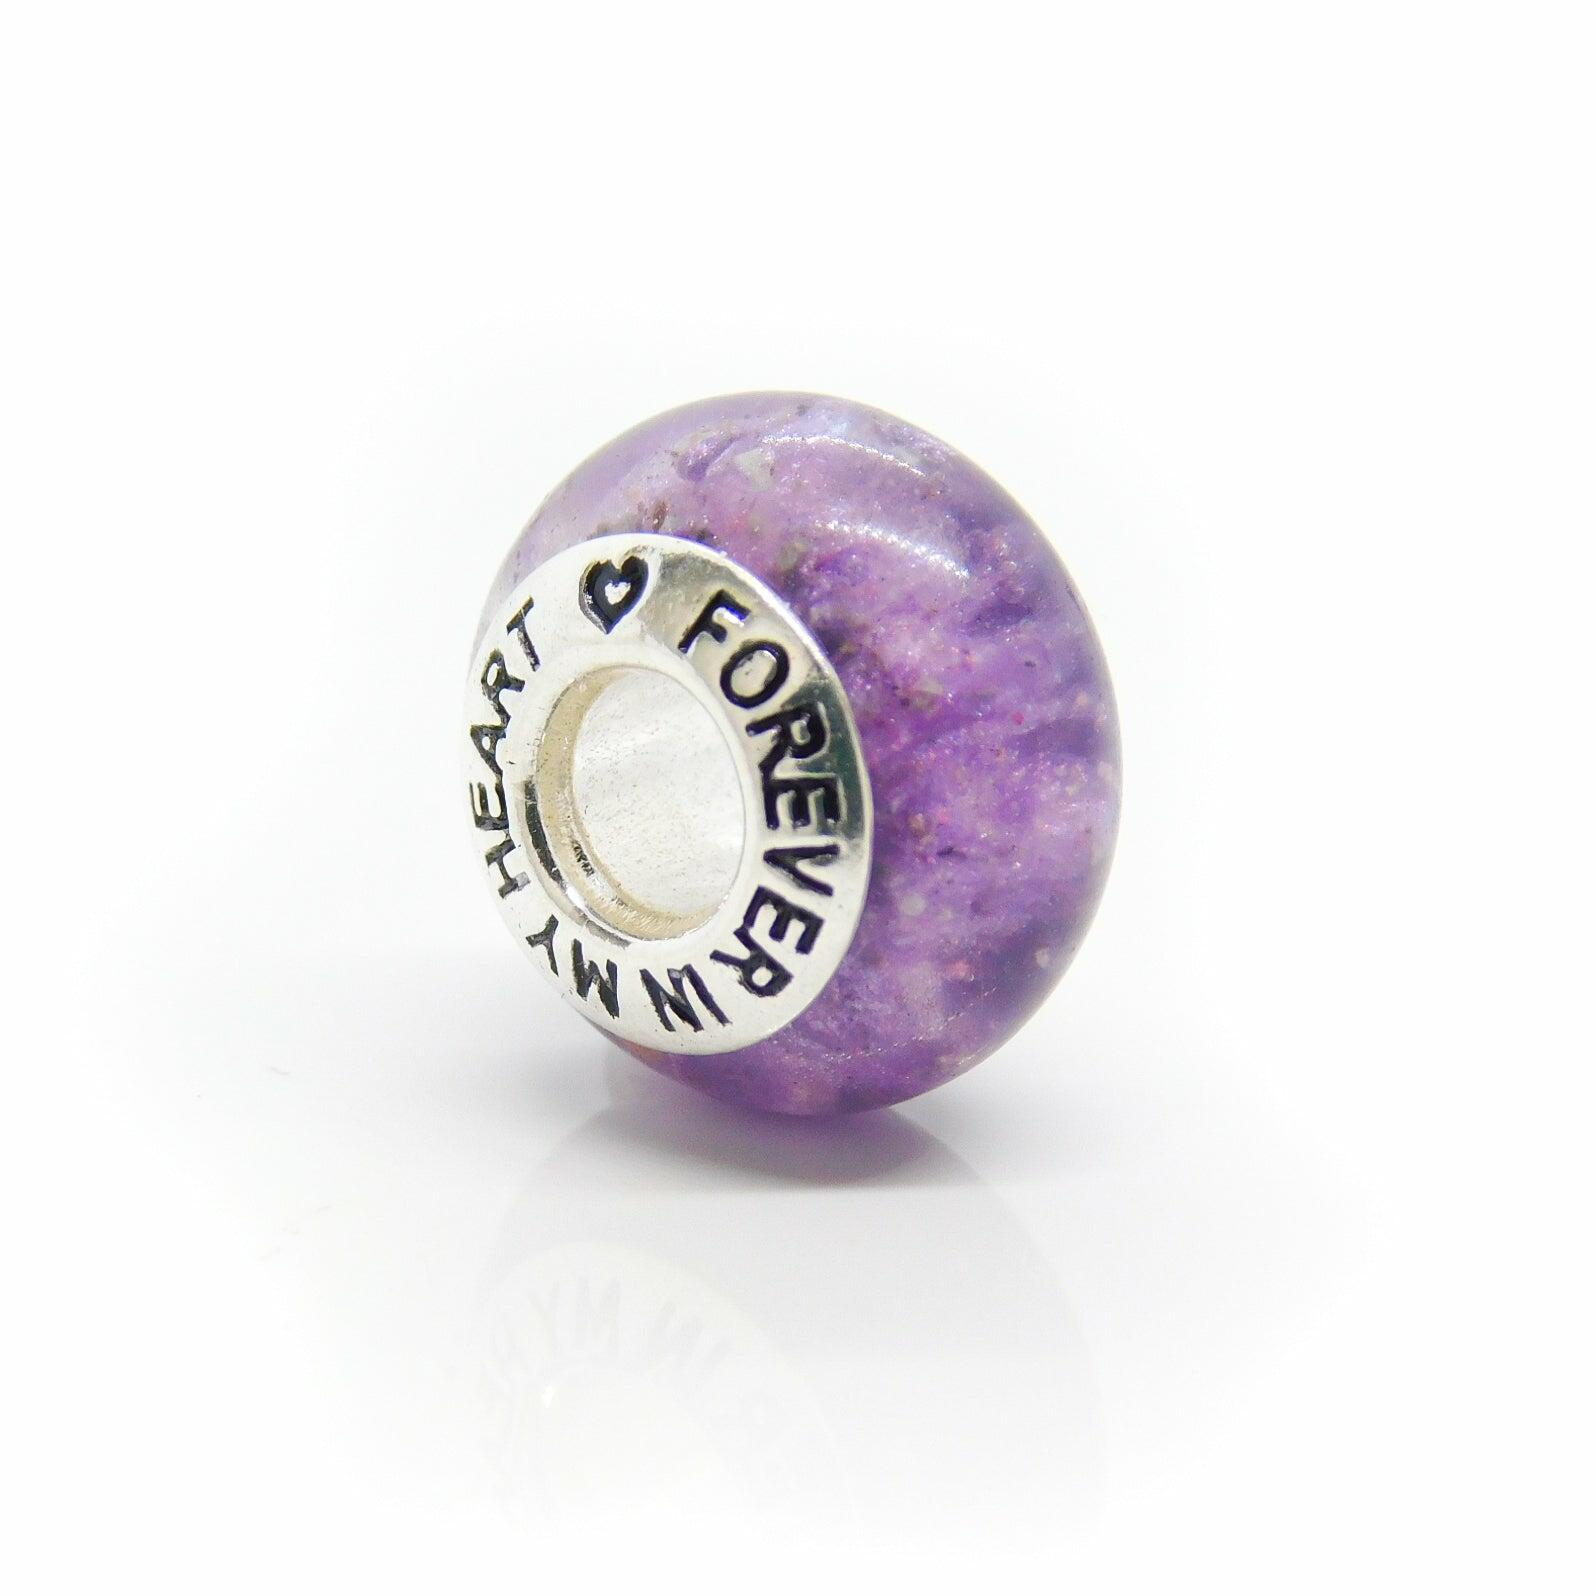 Circular Bead with Silver Insert that fits Modern Style Bracelet's. Contains Cremation Ashes.